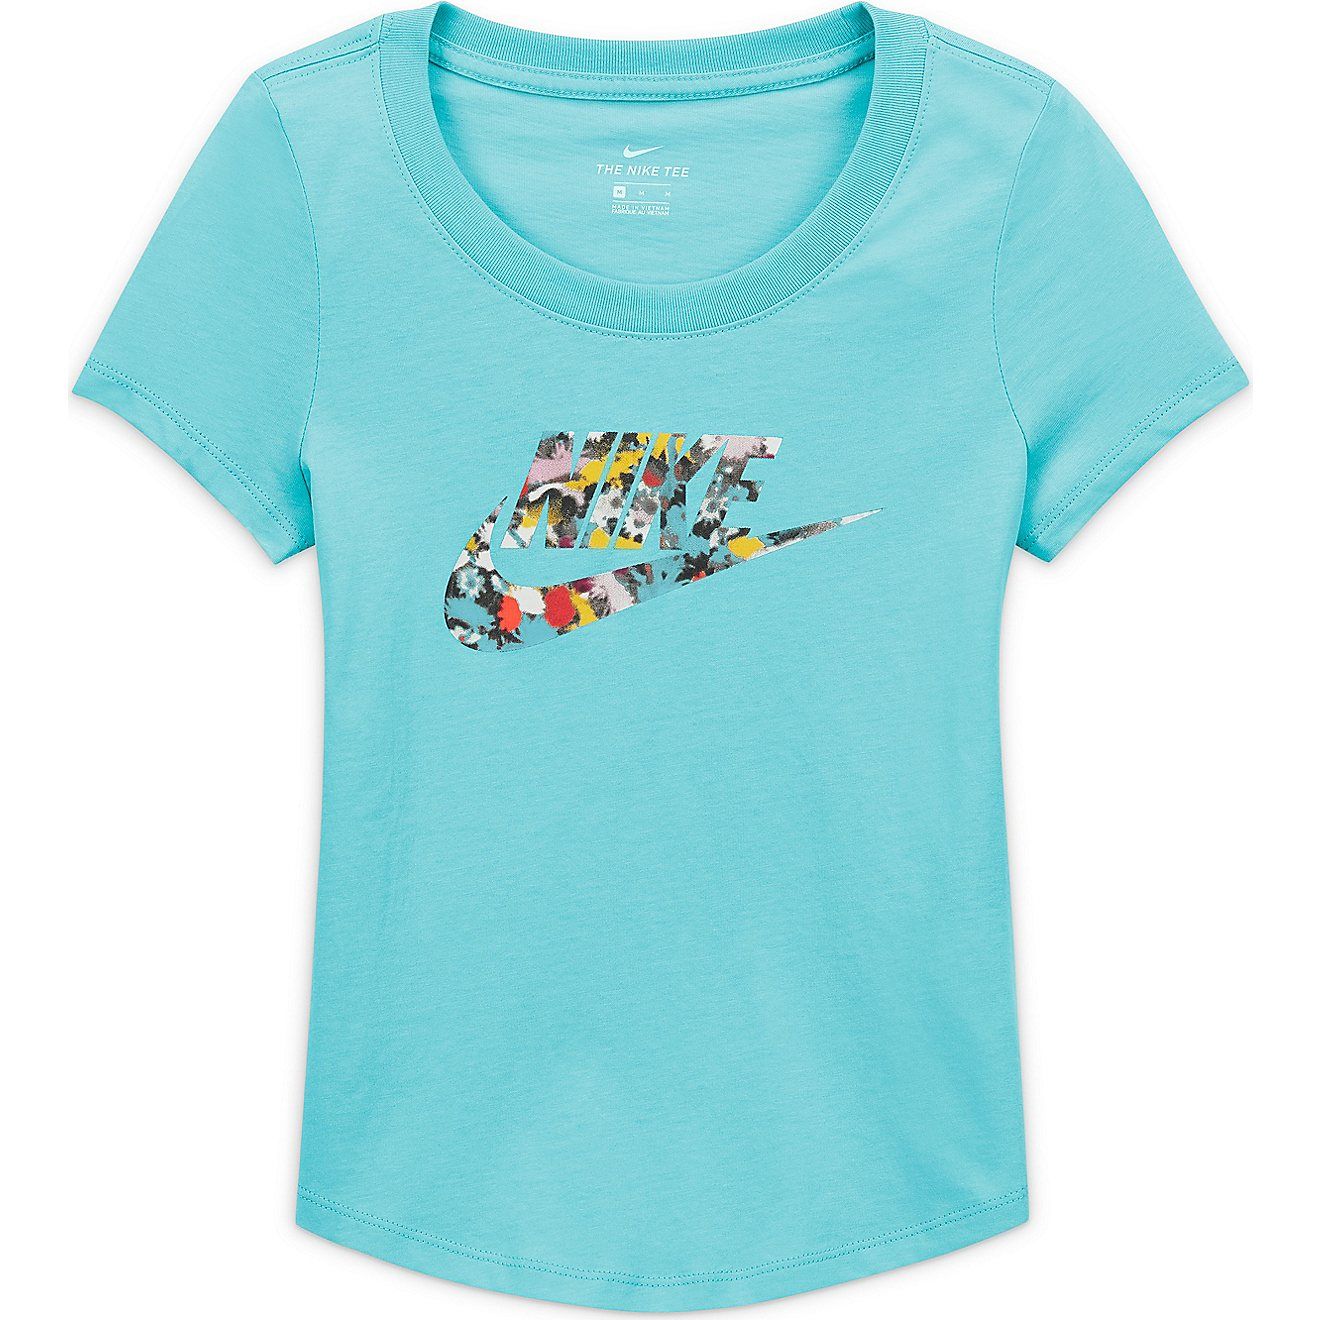 Nike Girls' Sportswear School Floral Graphic T-shirt | Academy Sports + Outdoor Affiliate